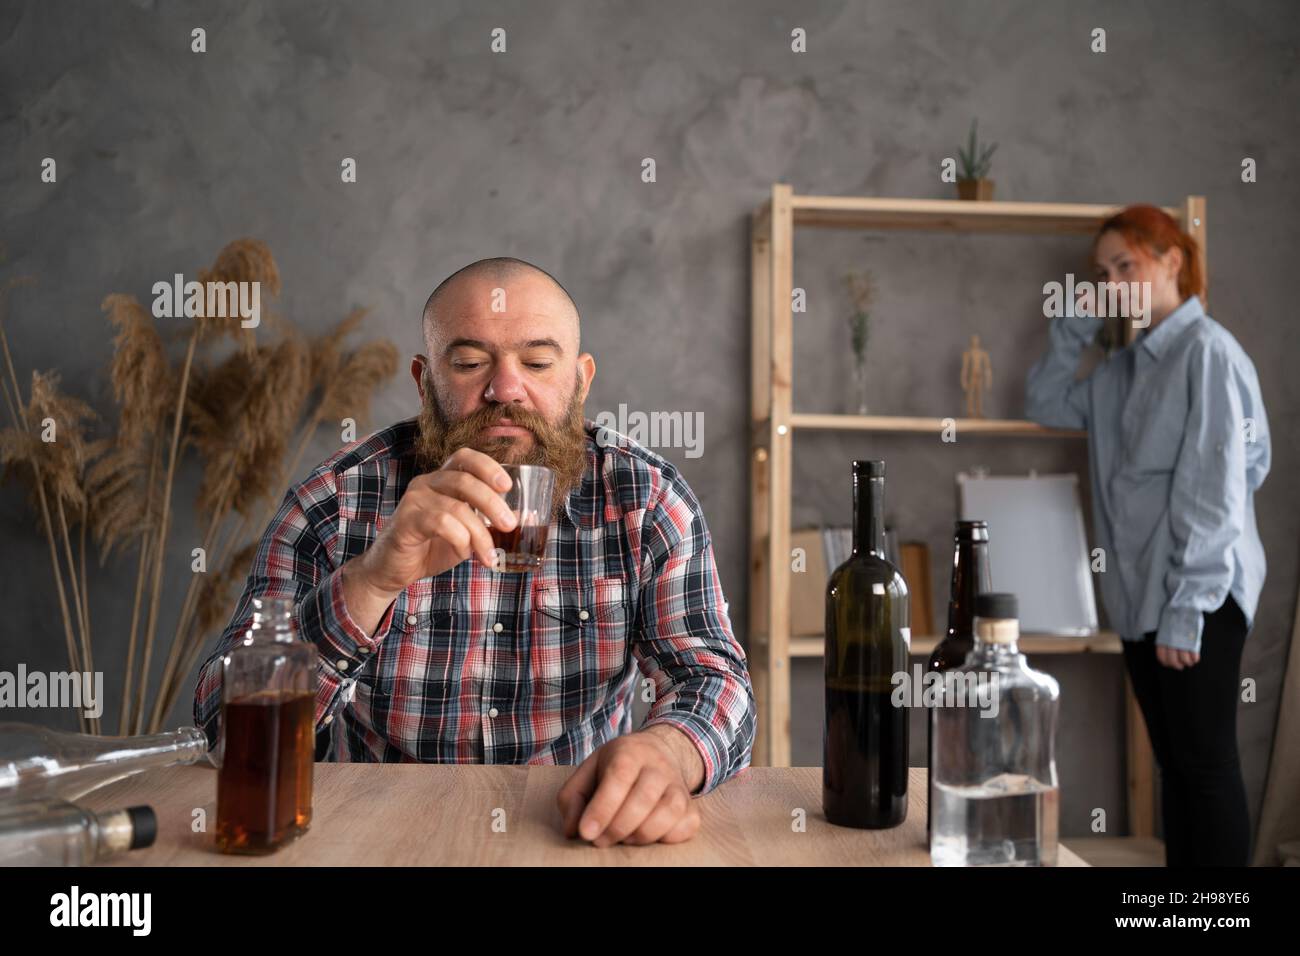 alcoholism in the family, a sad drunk husband pours alcohol into a glass and a sad relaxed wife in the background, alcohol abuse at home. Addiction Stock Photo